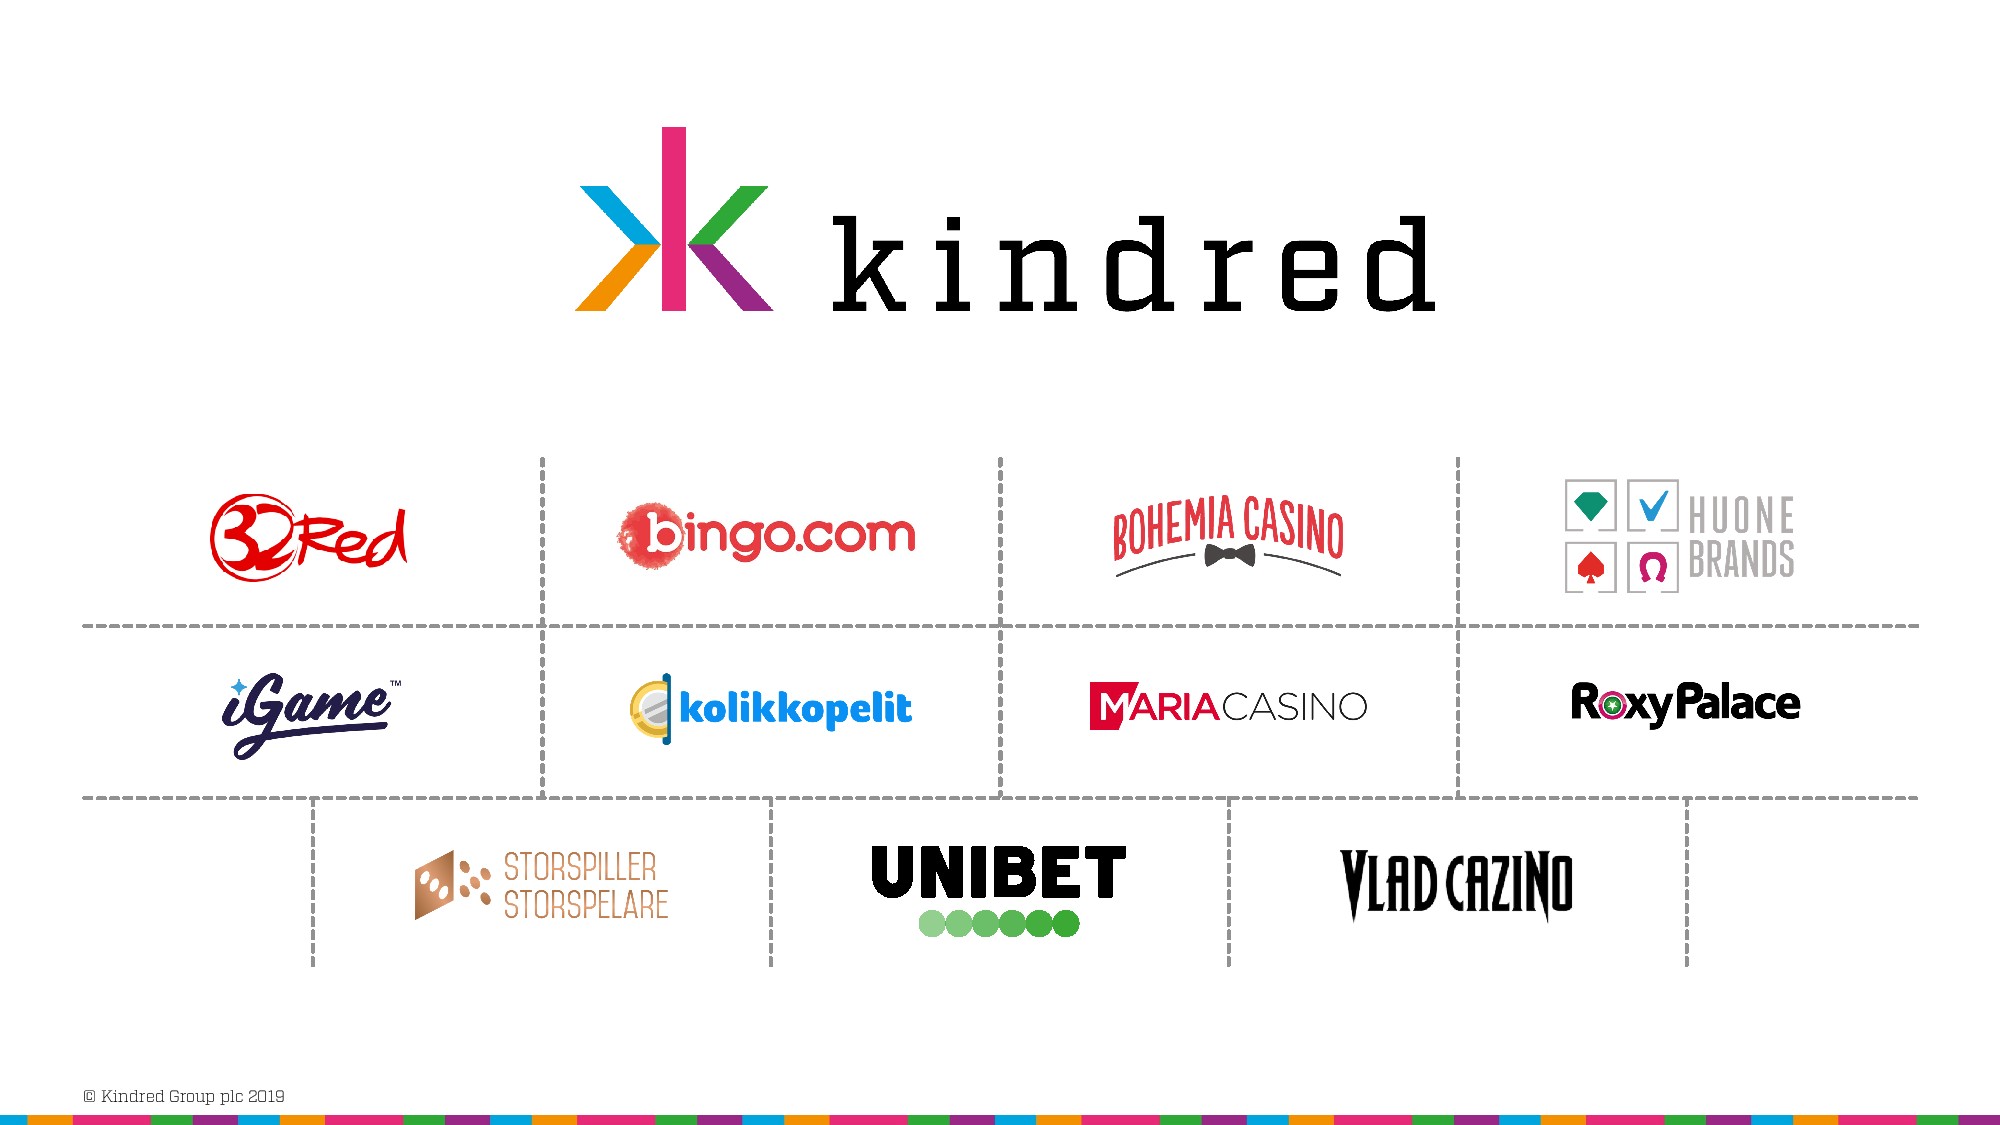 Kindred Group Opposed the Decision to Prolong Casino Closure in Sweden